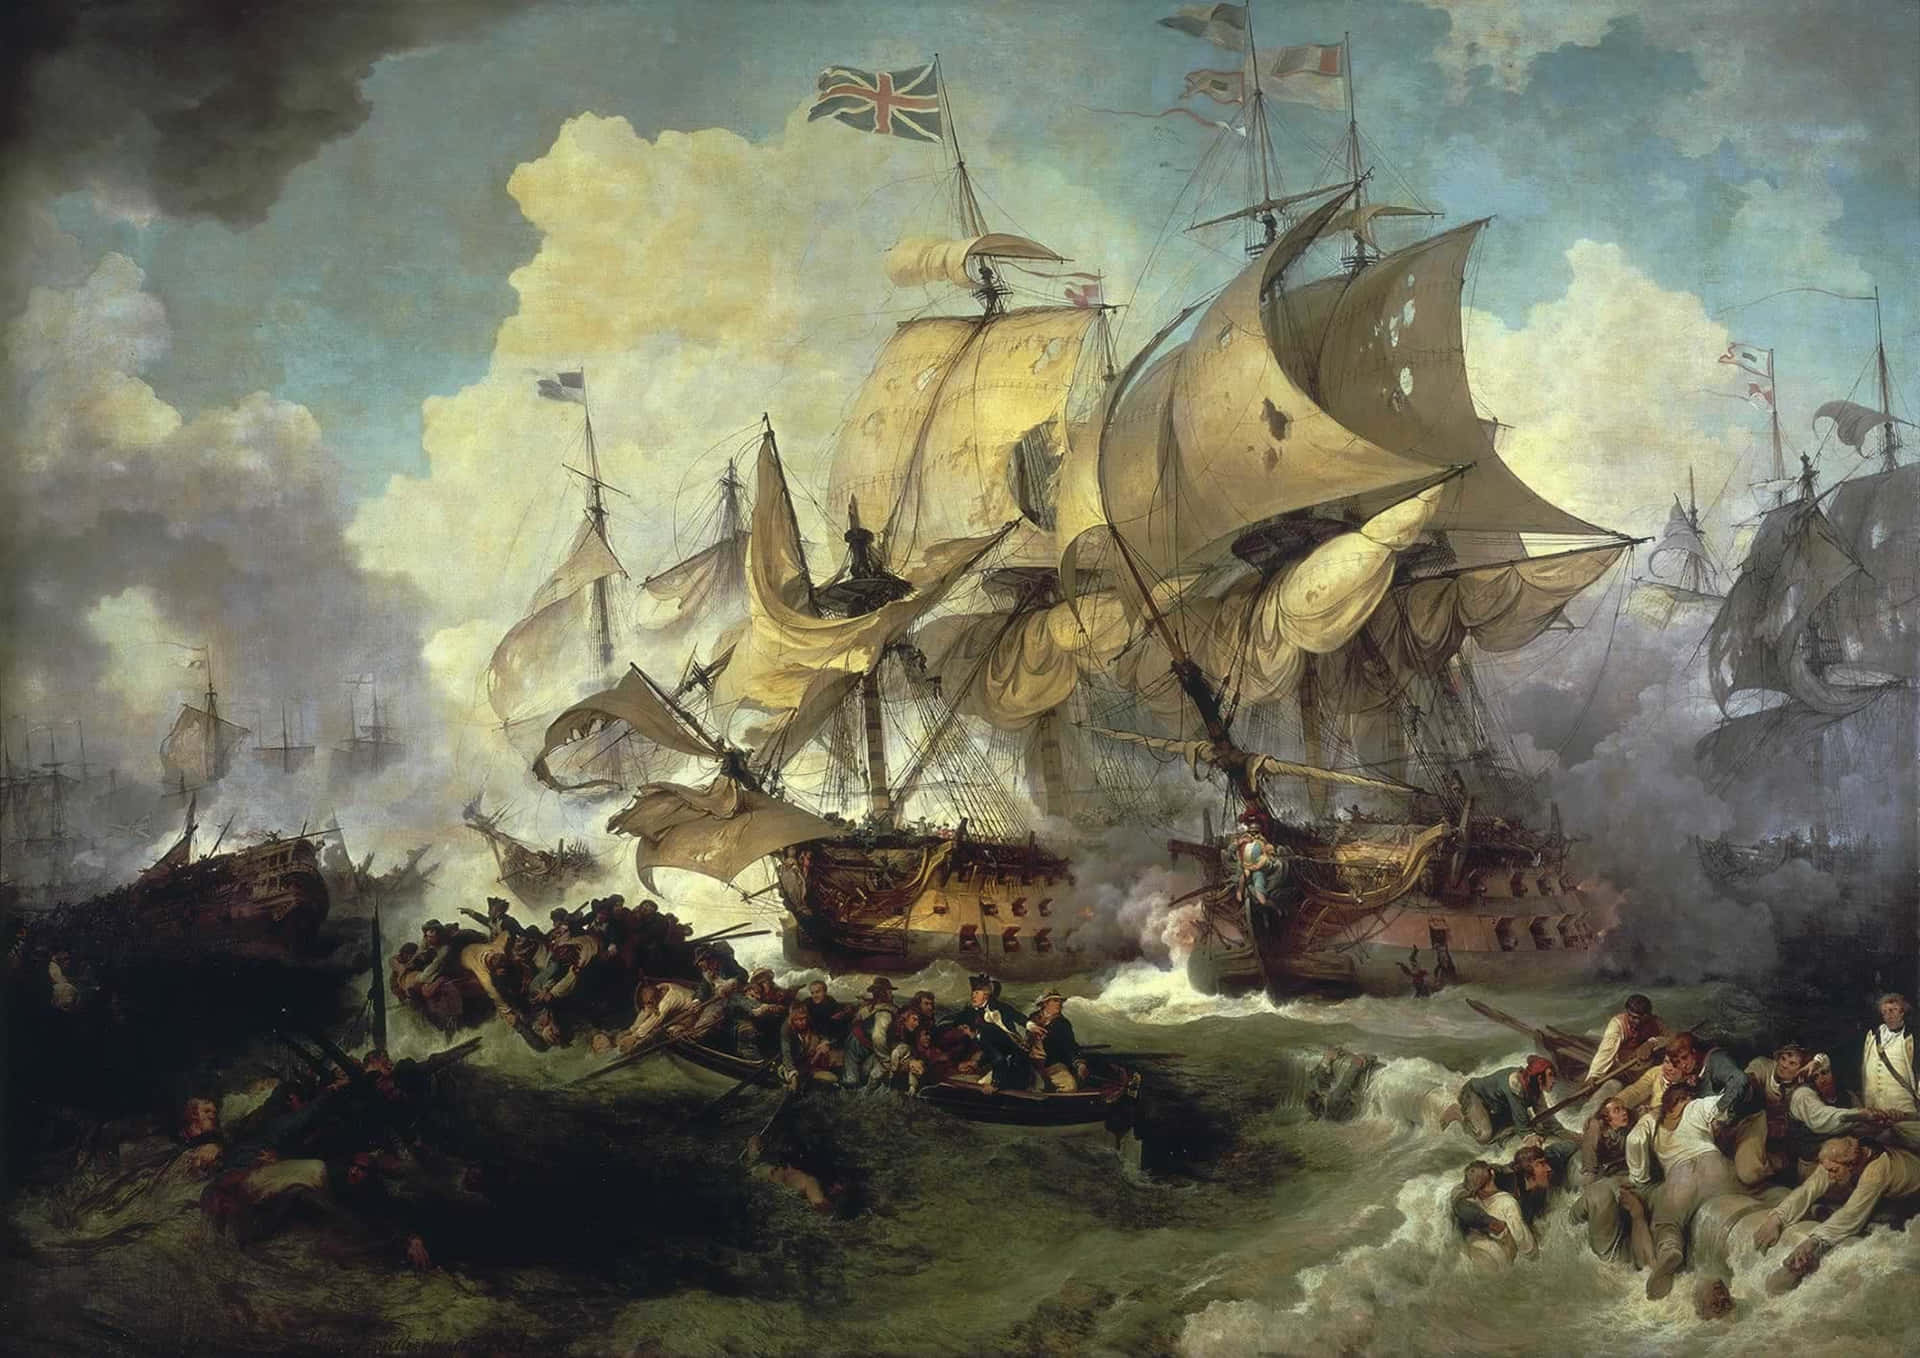 A Painting Of Ships In The Ocean With Men On Board